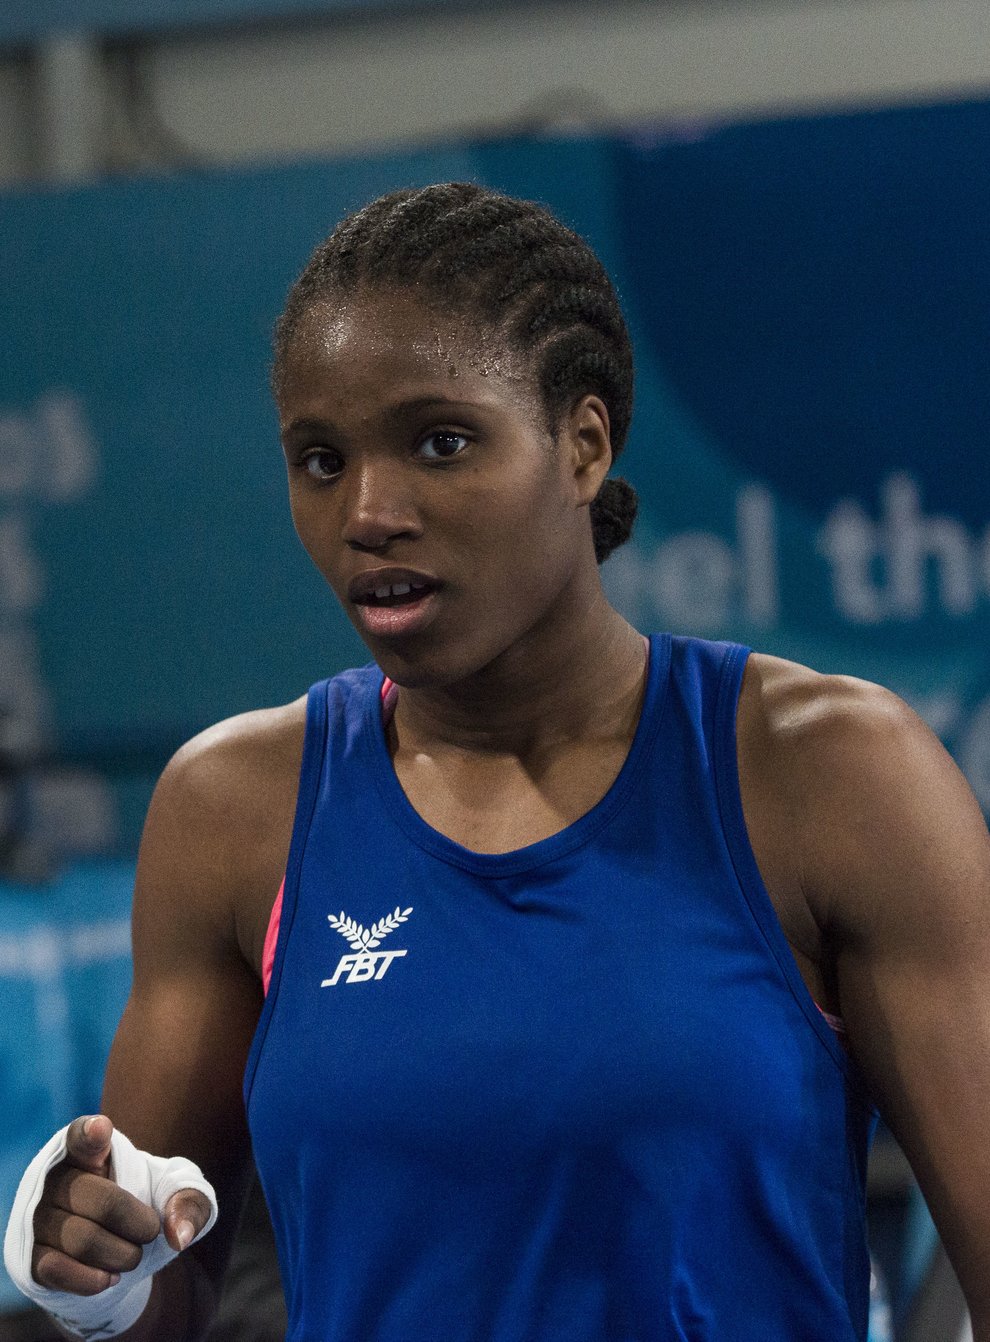 Caroline Dubois will be looking to secure her spot at Tokyo 2020 (PA Images)